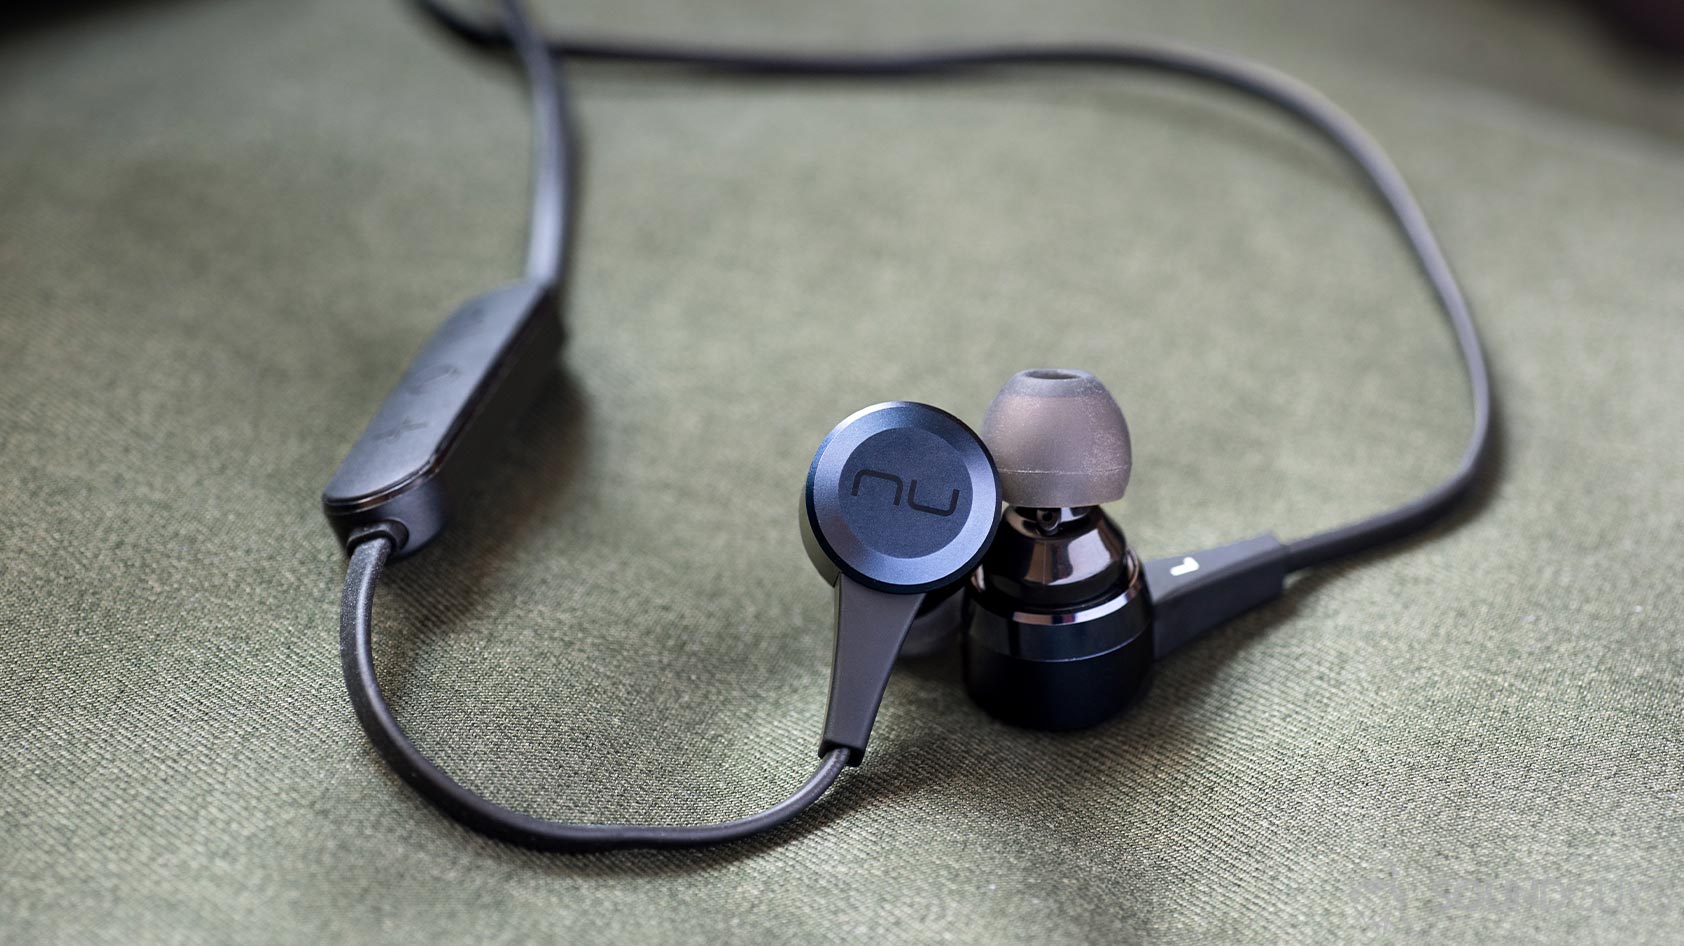 A photo of the Massdrop x NuForce Stride wireless earbuds (blue) and the NuForce logo on the earbuds.